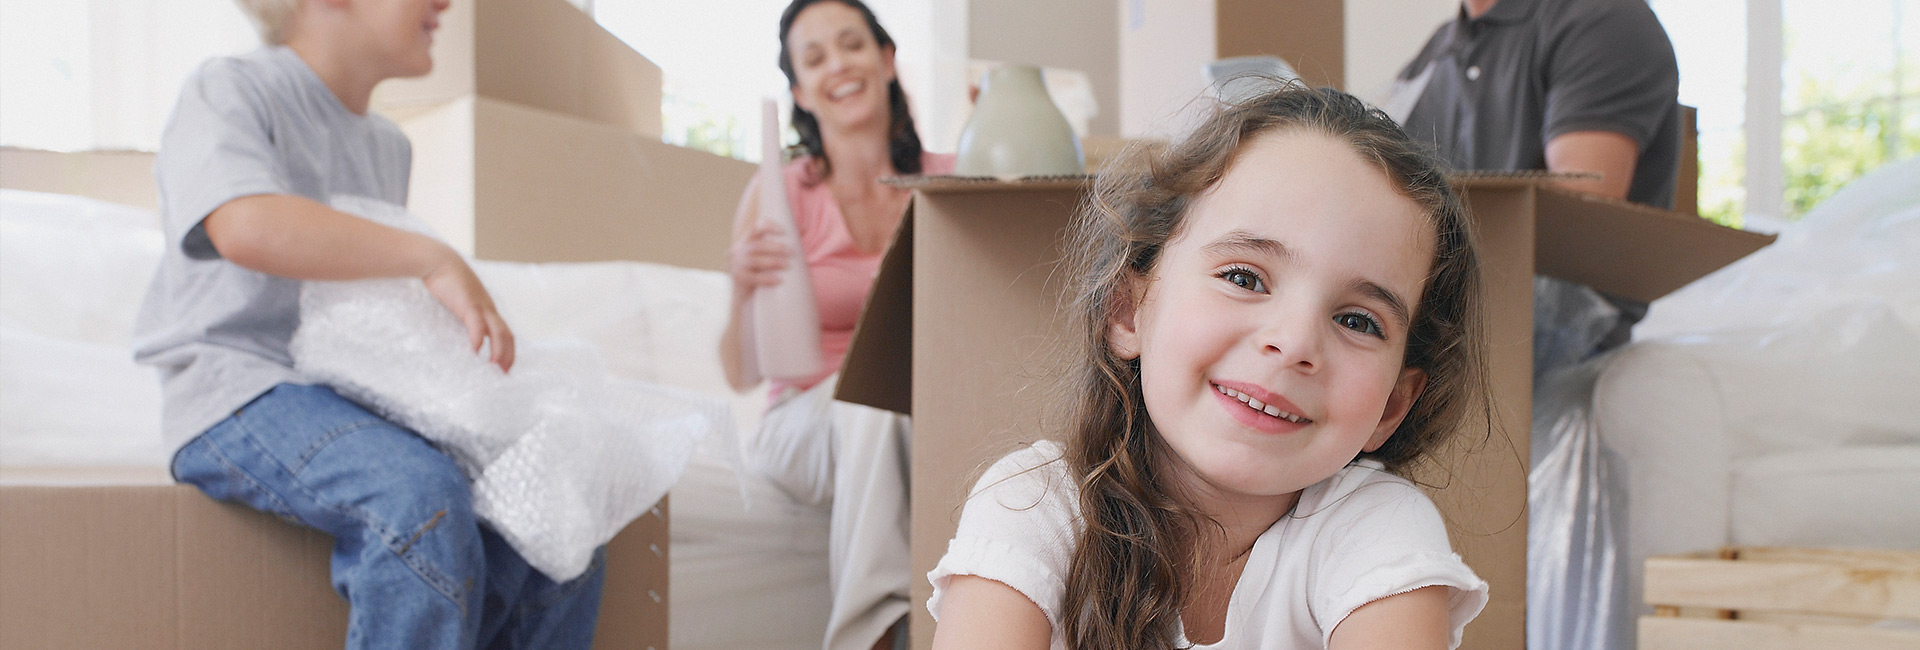 Header image showing family happily unpacking boxes in their new home